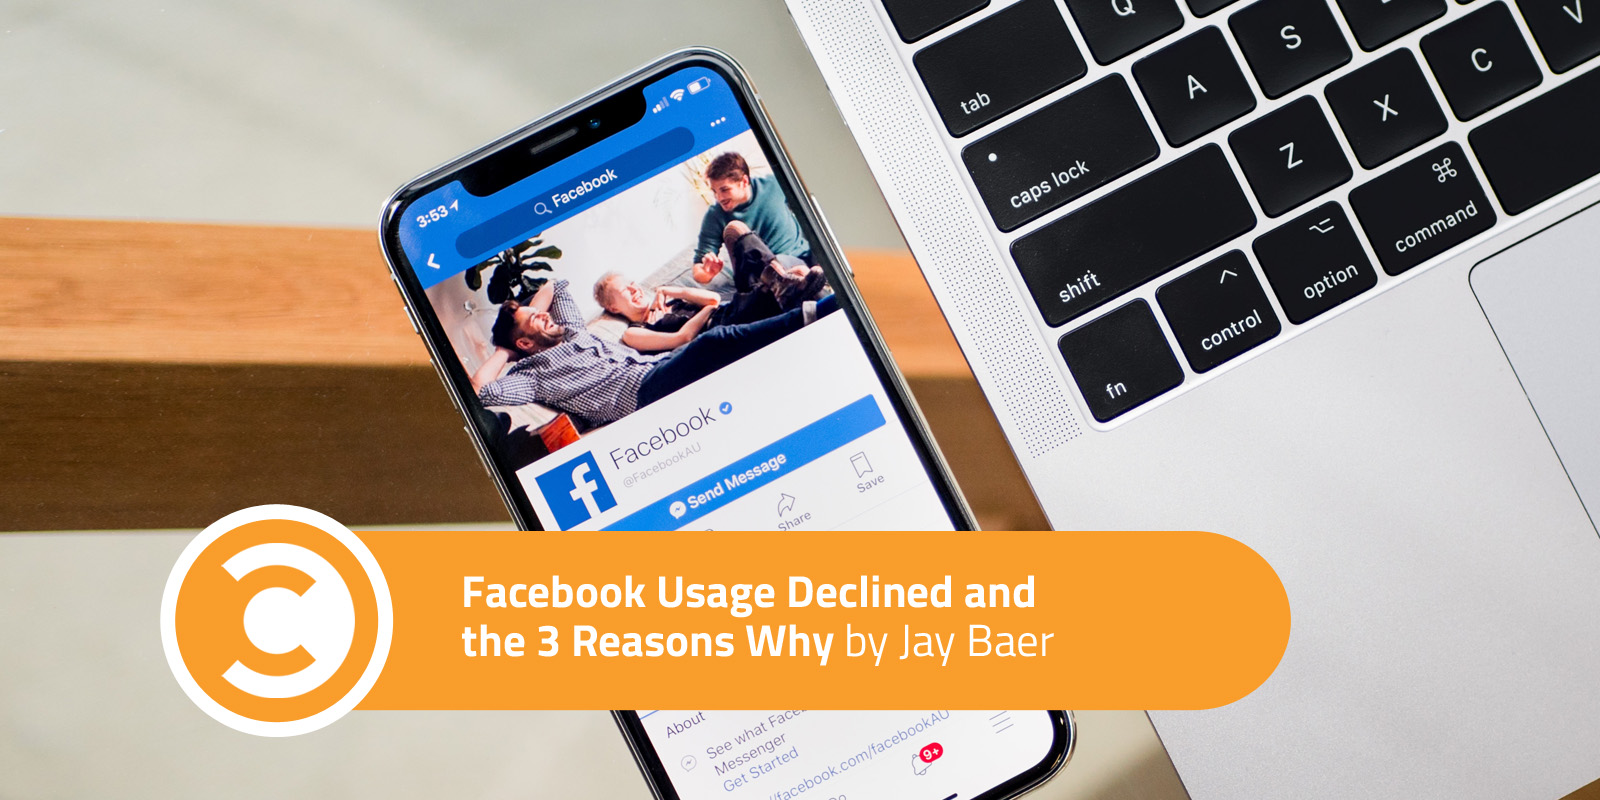 Facebook Usage Declined and the 3 Reasons Why